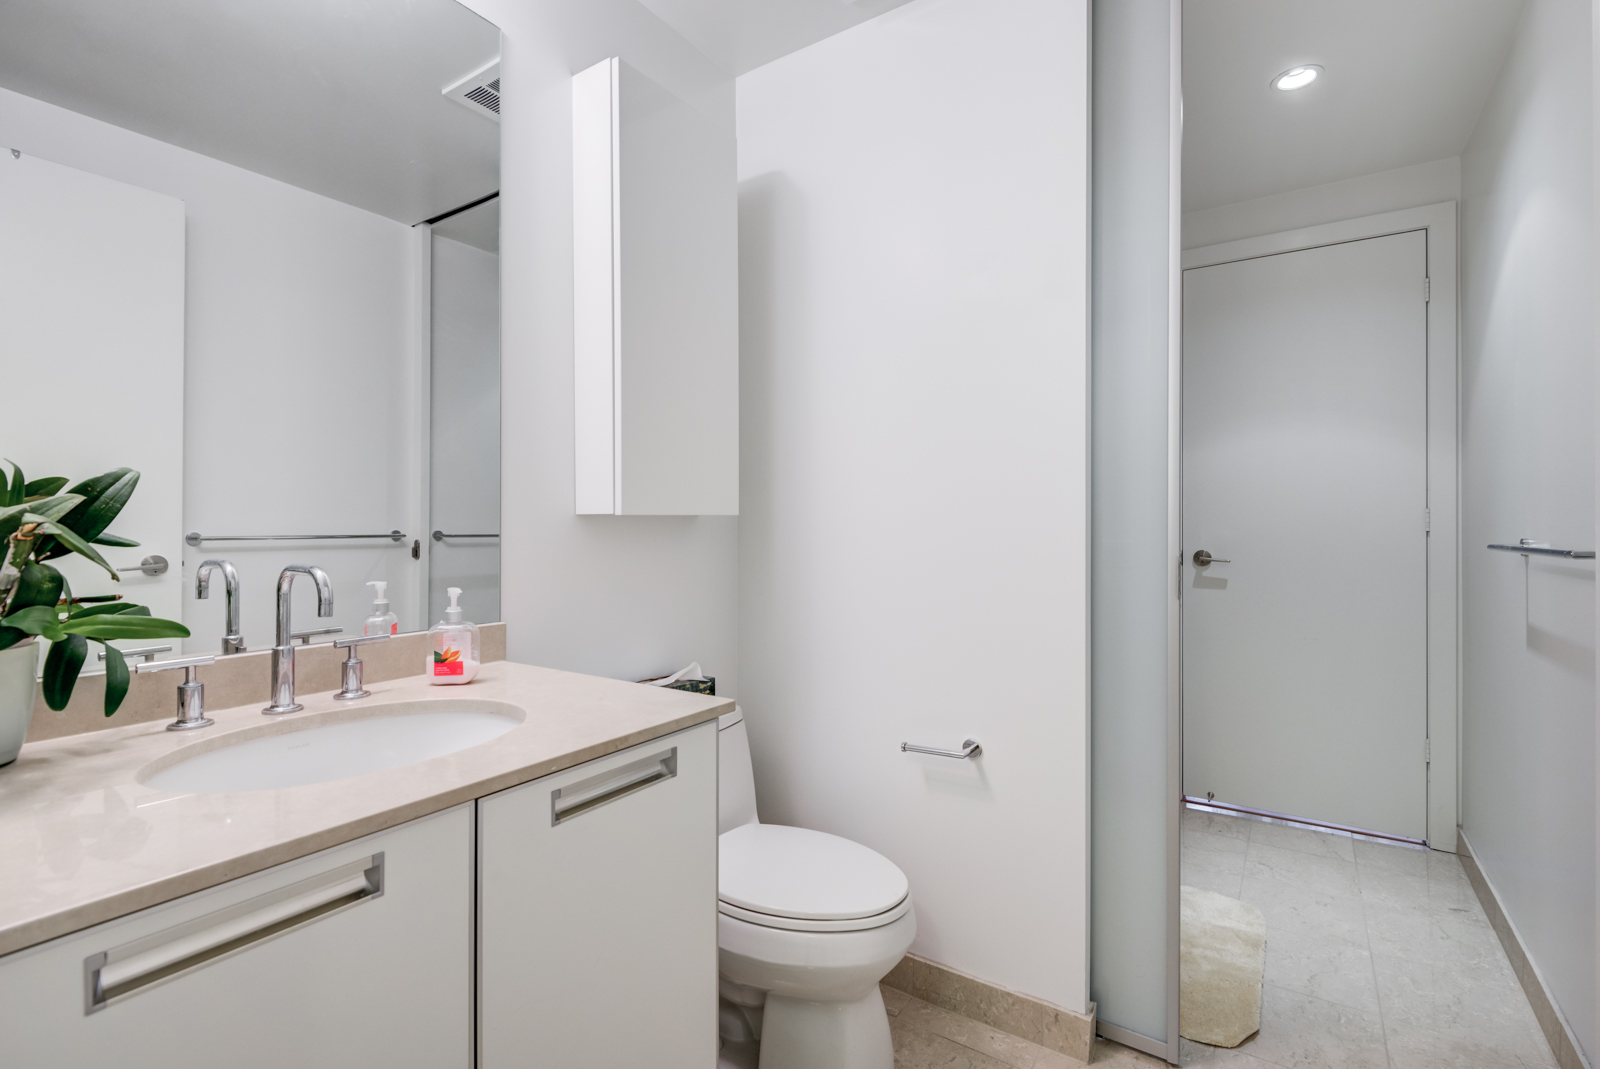 Our first look at 33 Charles St E Unit 911 bathroom. We see the sink, mirror and toilet.